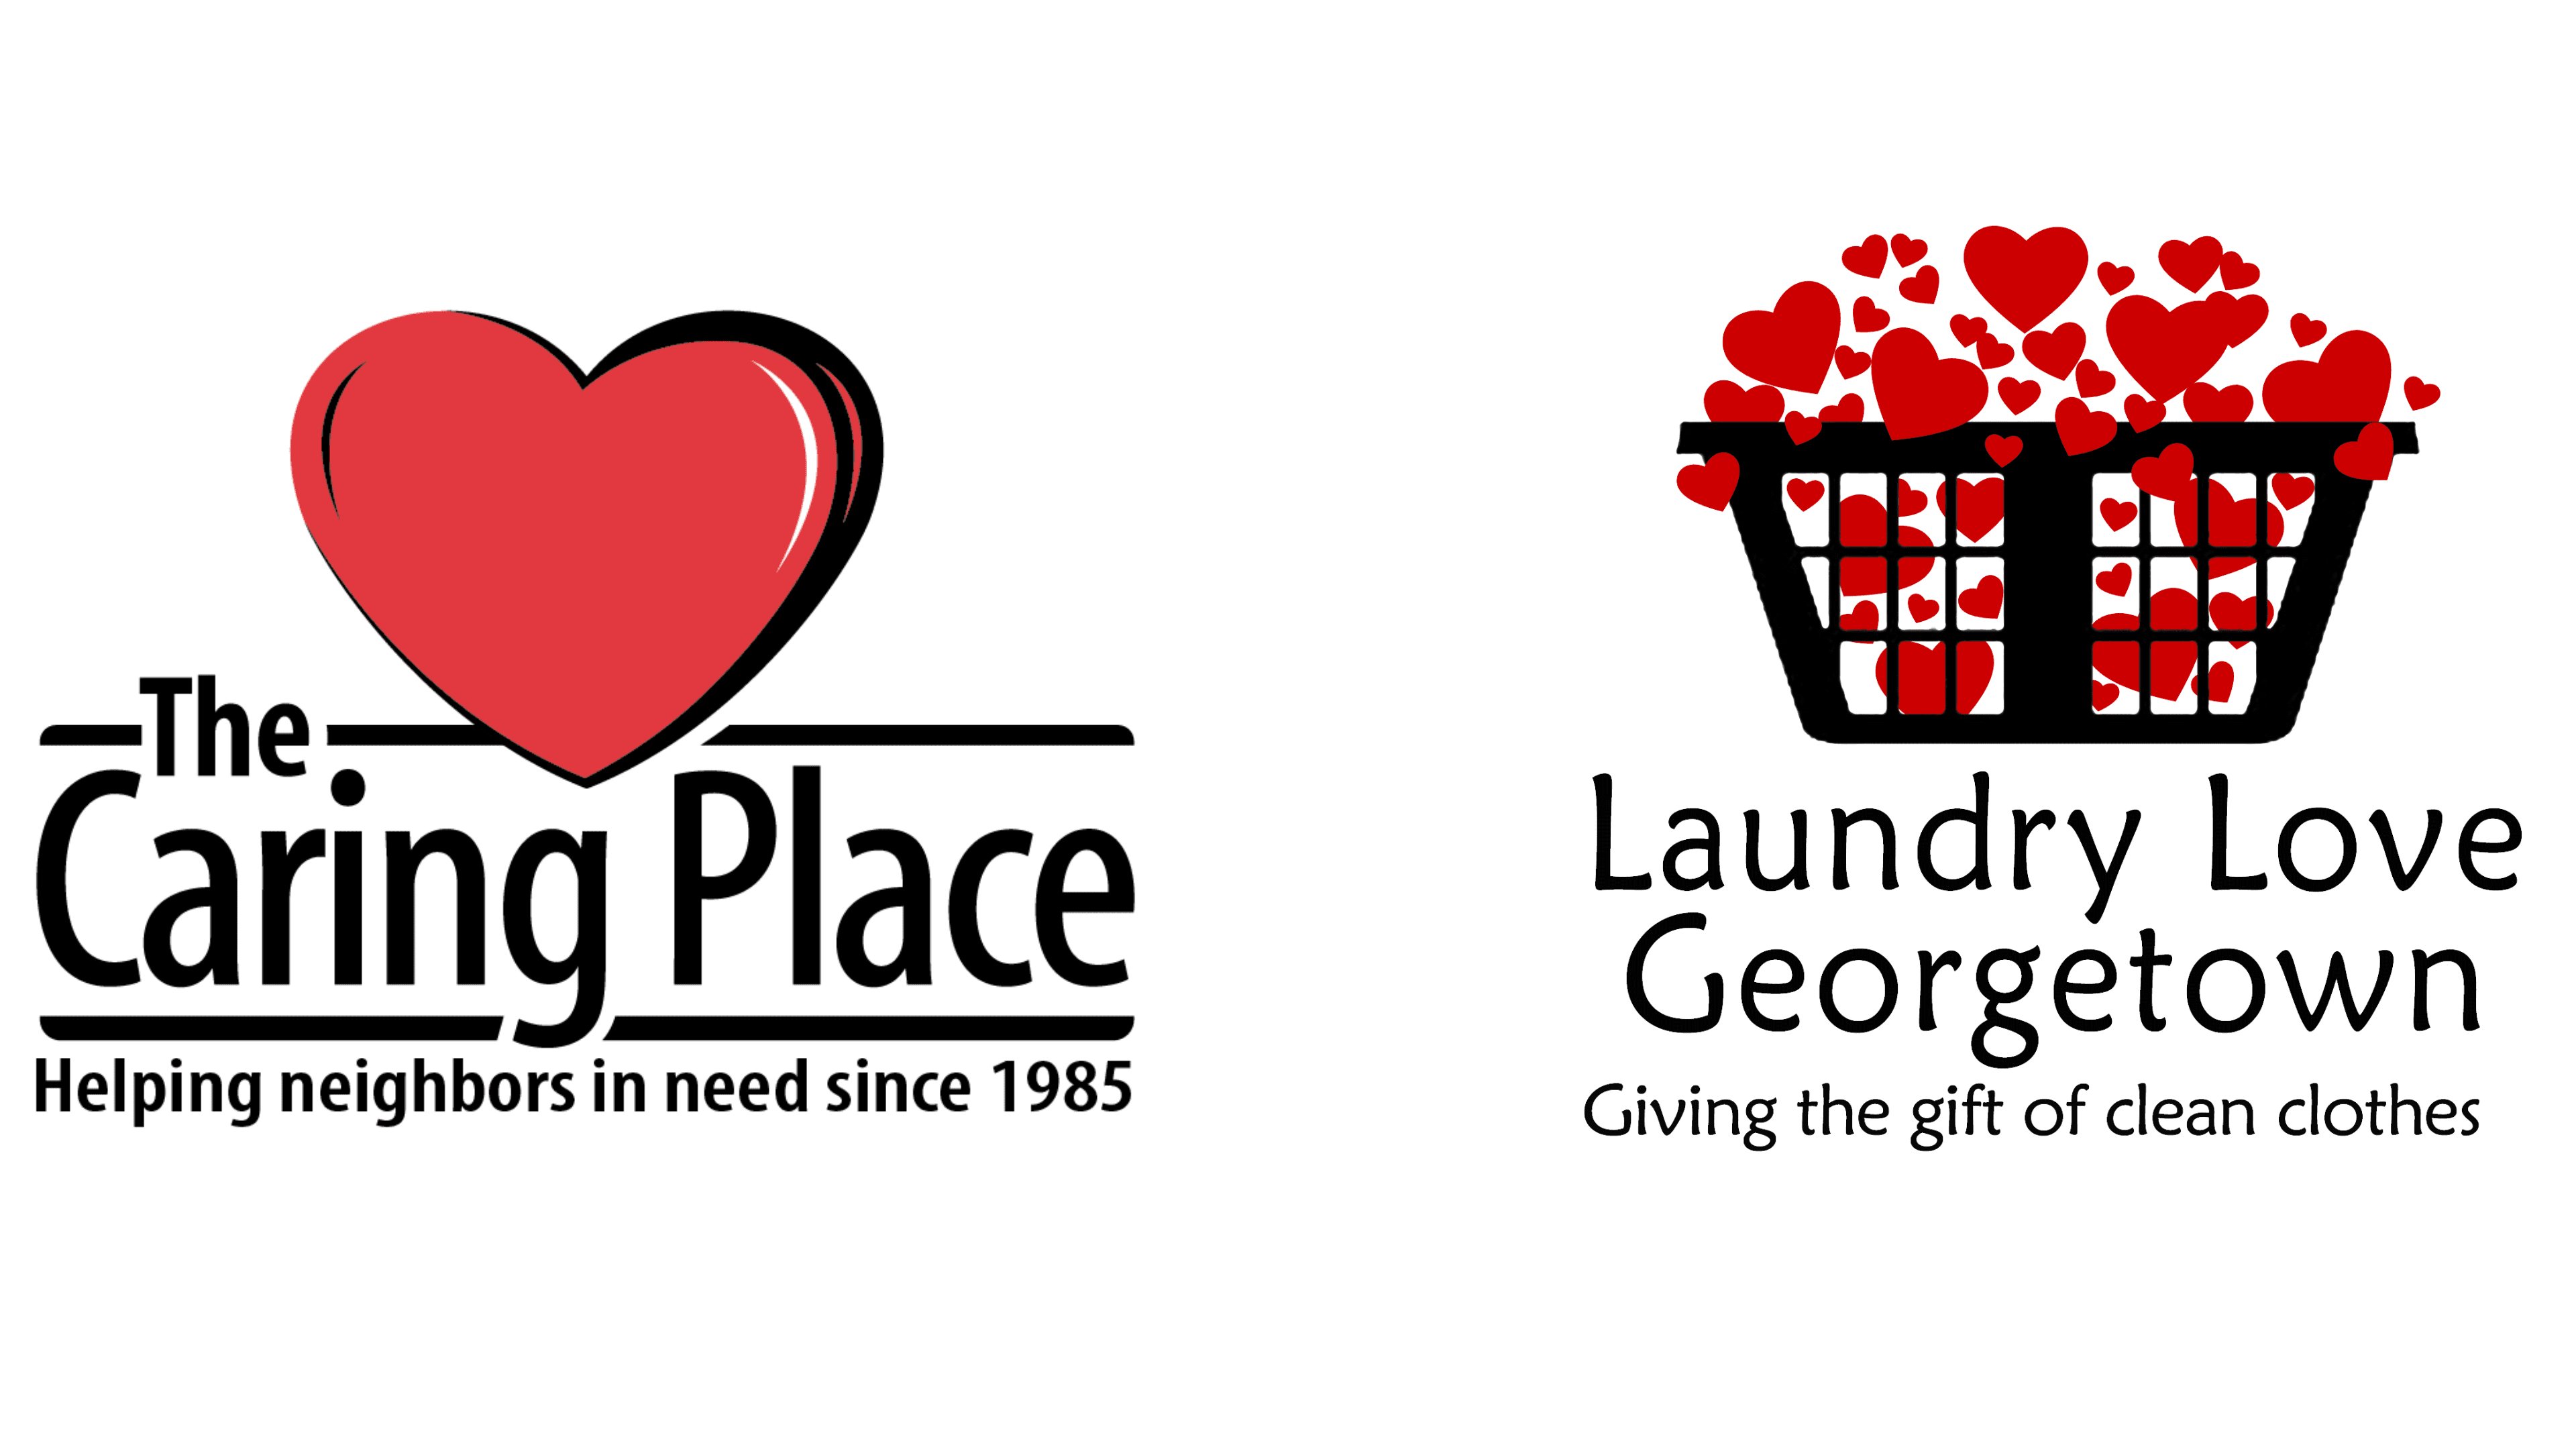 The Caring Place Expands Services to Include Free Laundry Program "Loads of Caring"